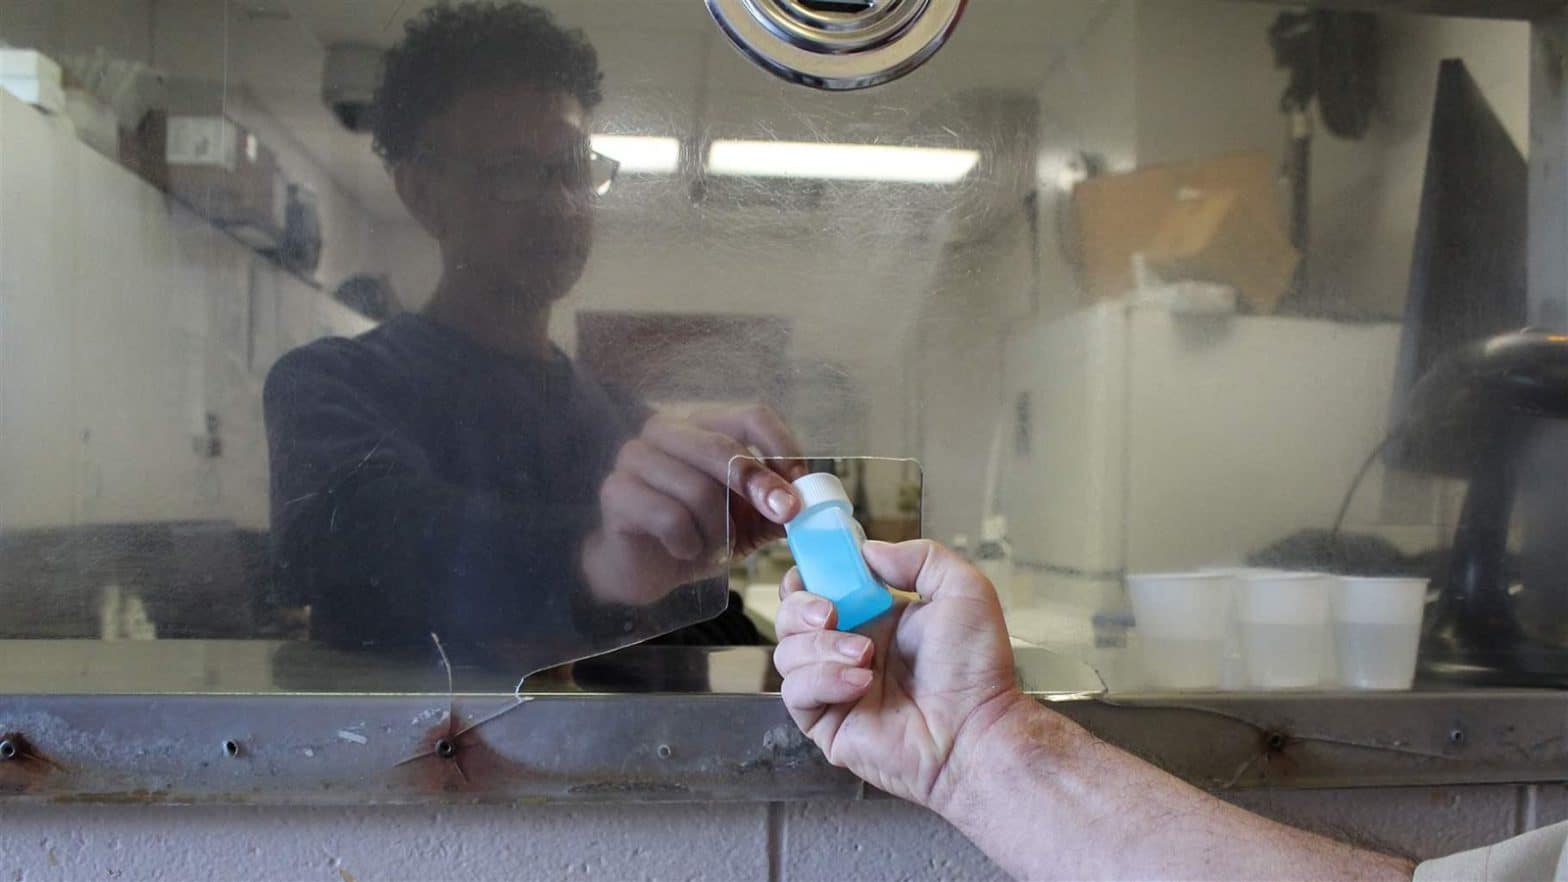 This State Has Figured Out How to Treat Drug-Addicted Inmates